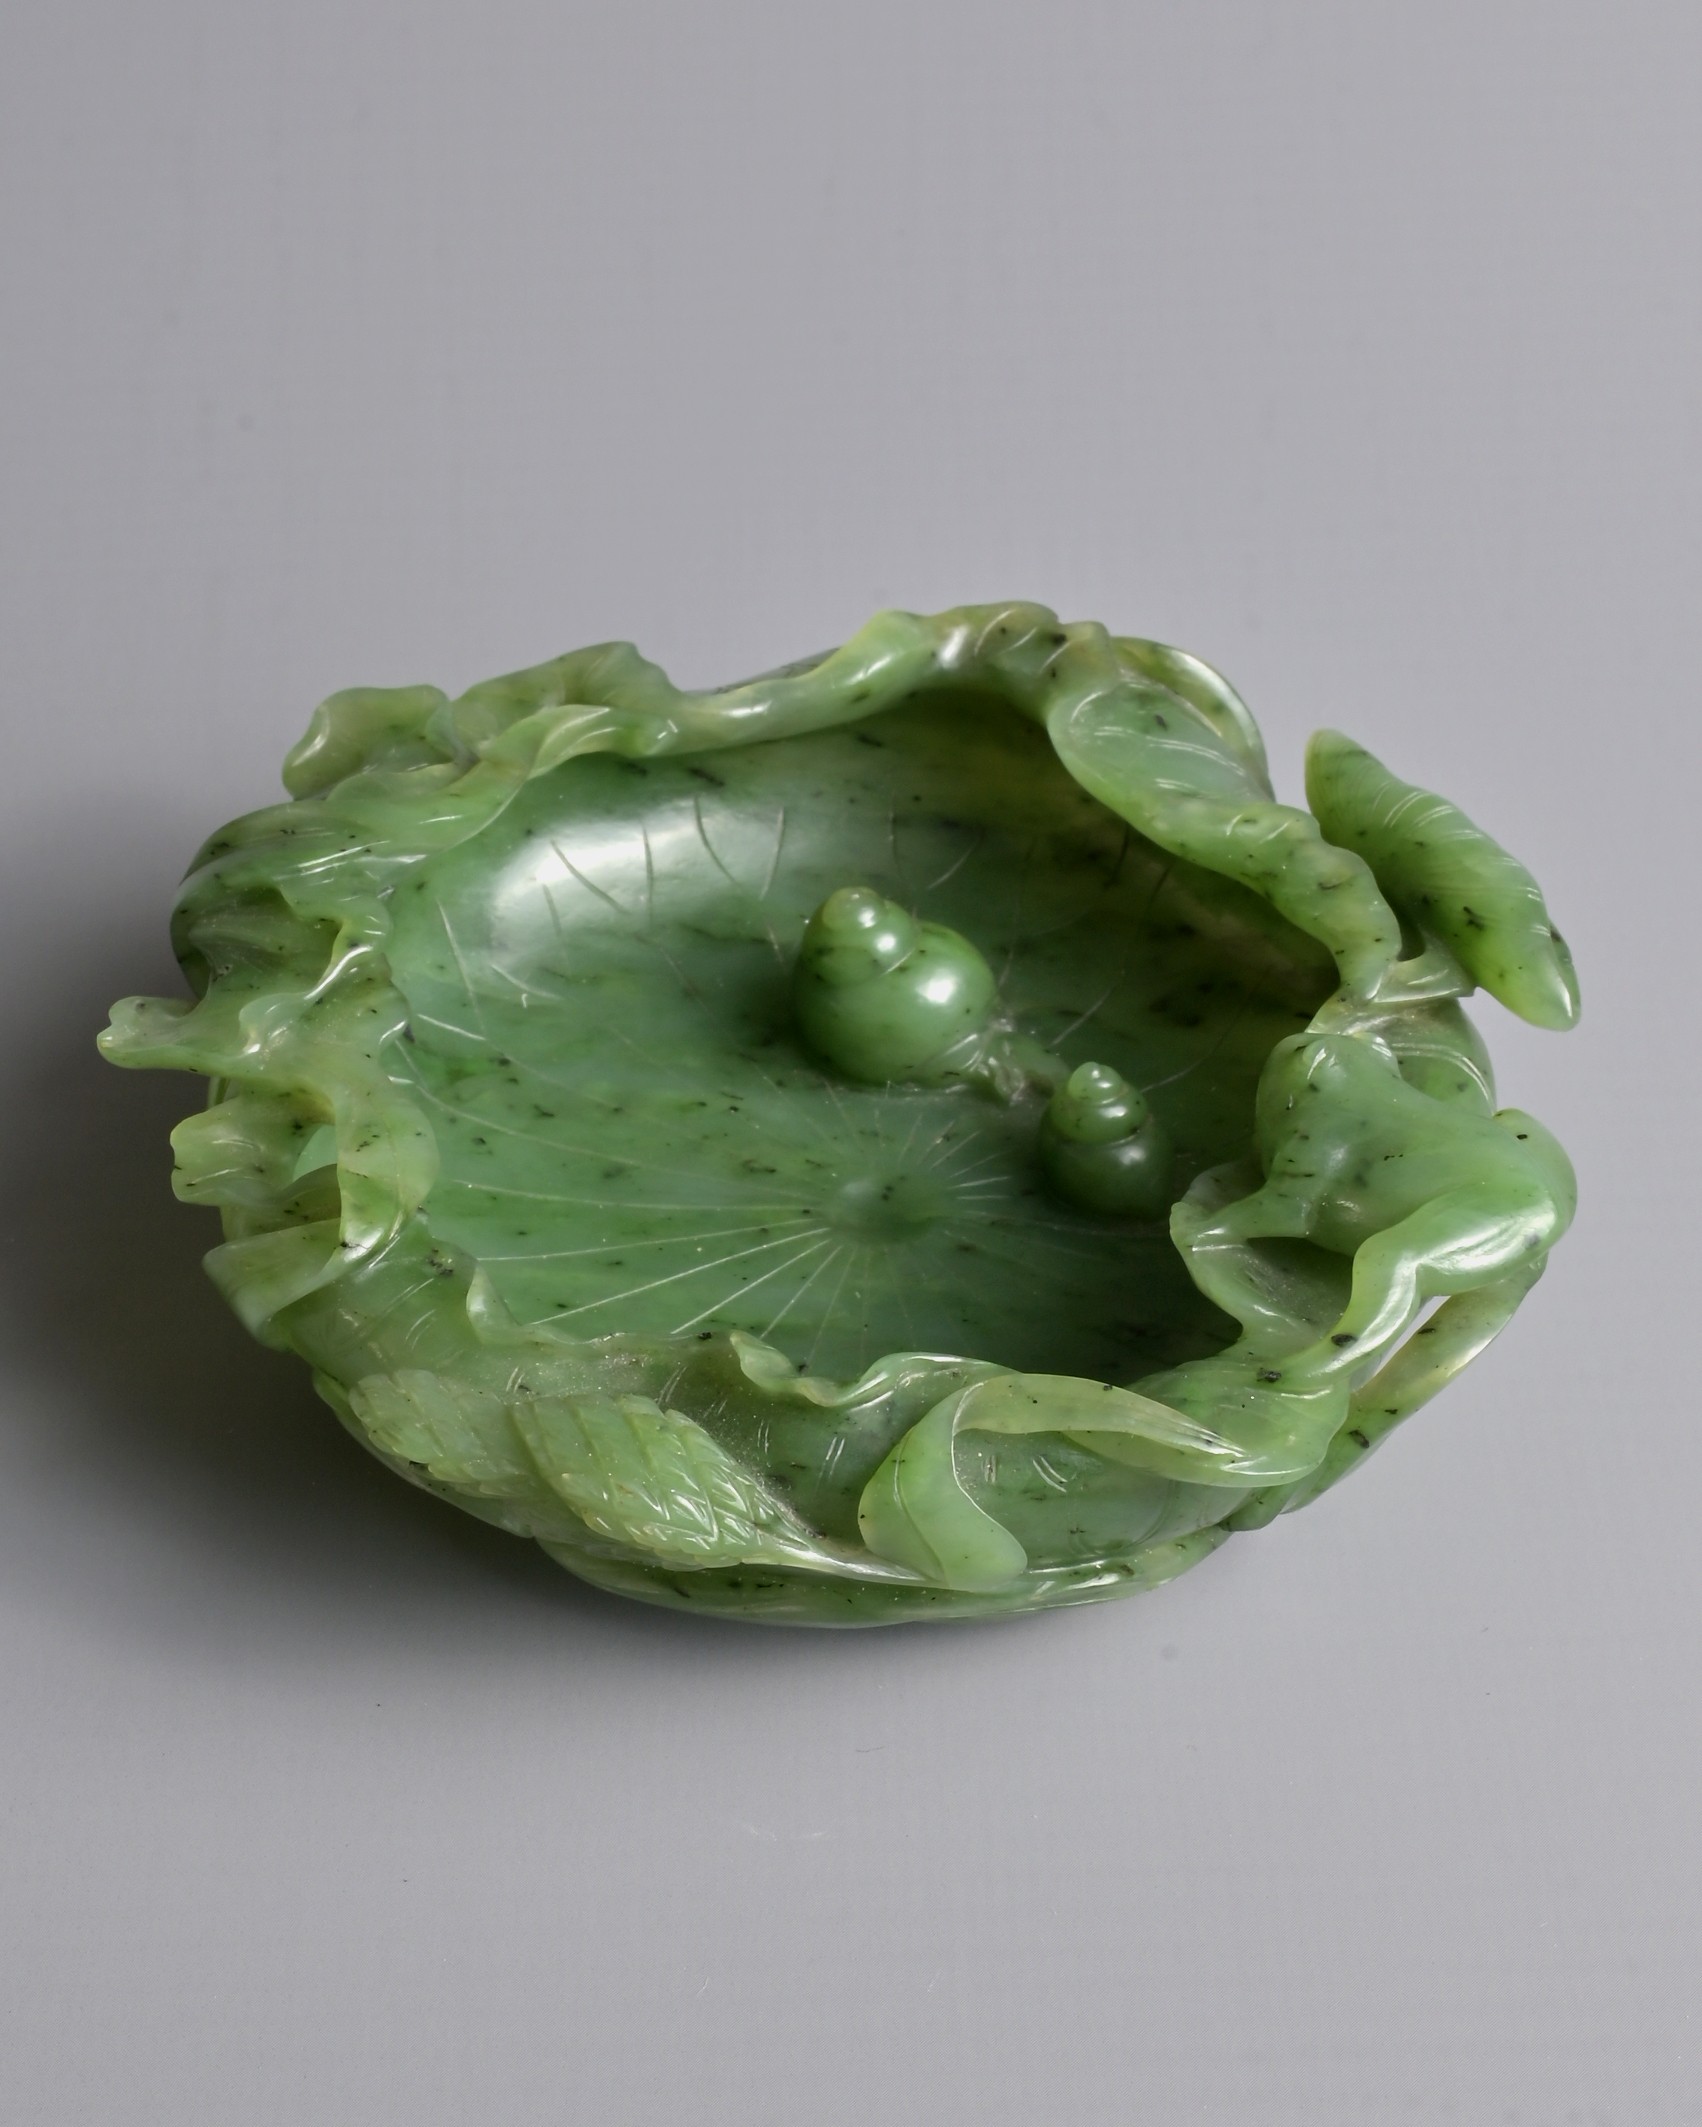 A FINE CHINESE SPINACH GREEN JADE BRUSH WASHER, QING DYNASTY. Finely carved shallow brush washer